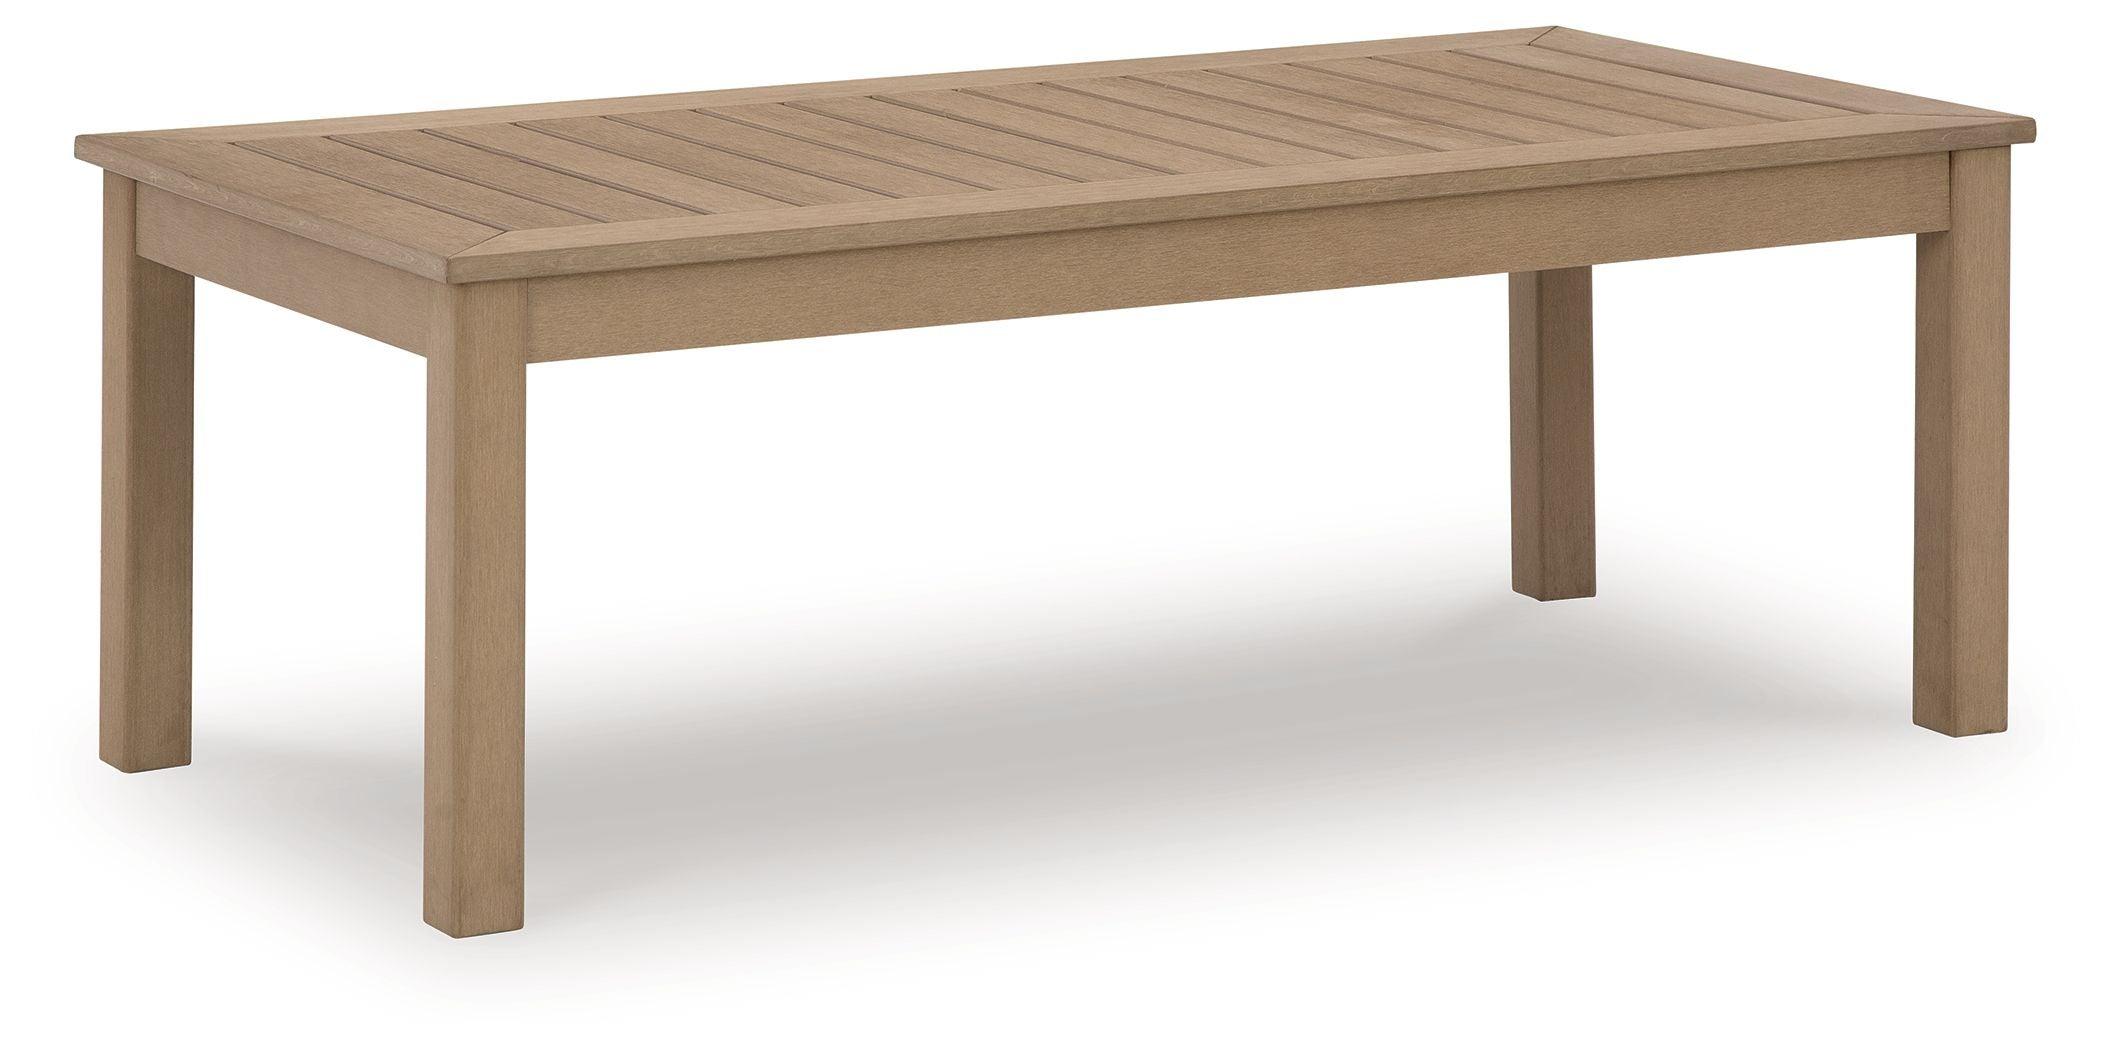 Signature Design by Ashley® - Hallow Creek - Driftwood - Rectangular Cocktail Table - 5th Avenue Furniture